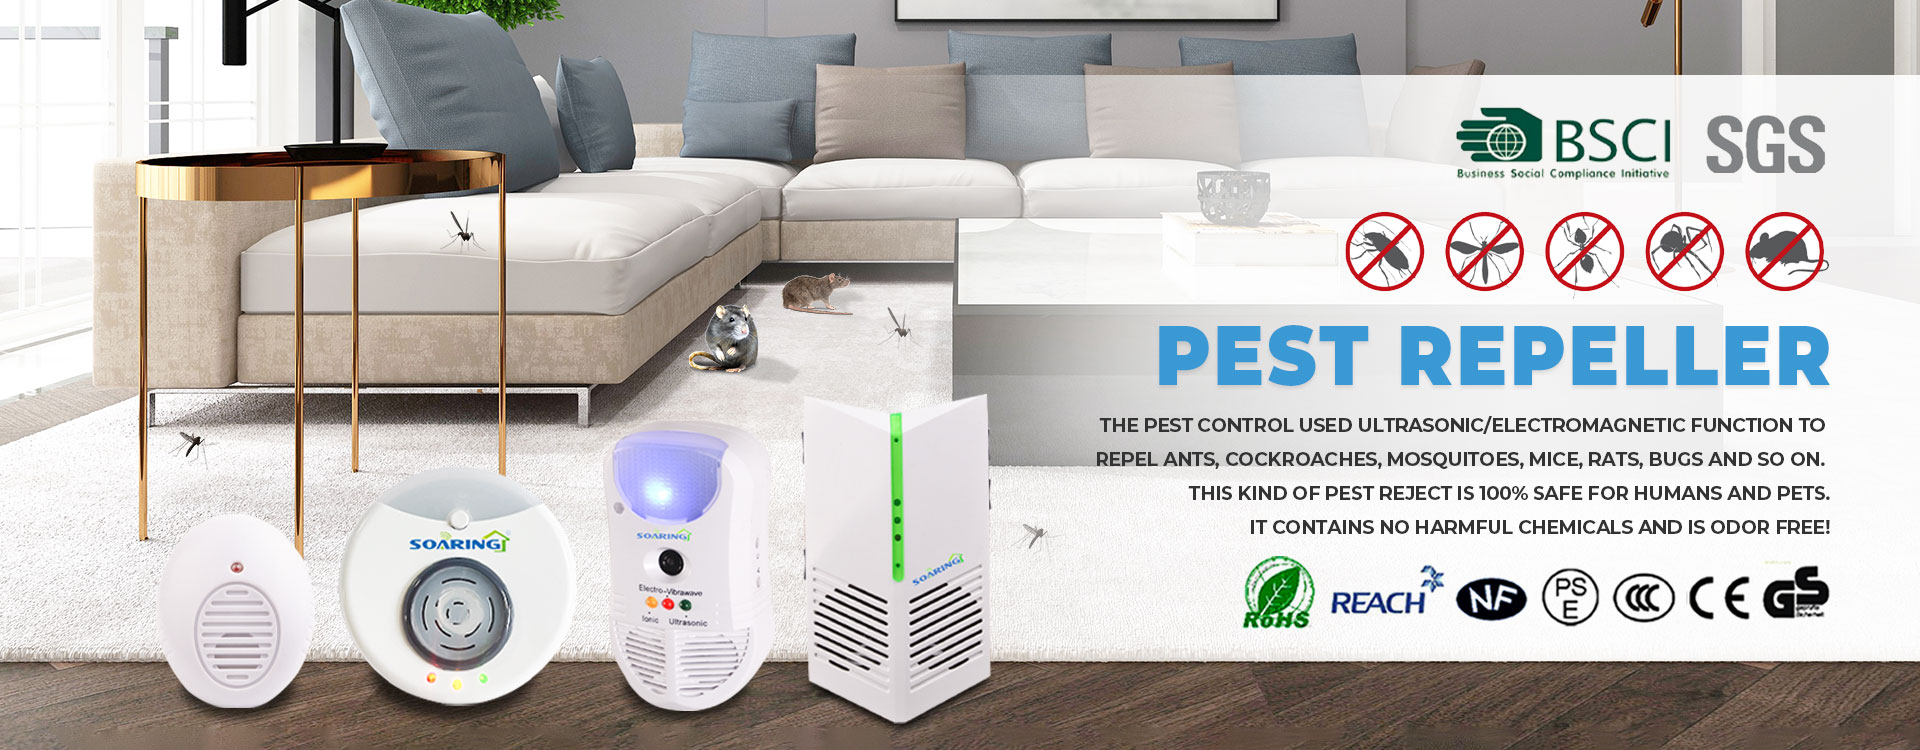 The pest control used ultrasonic/electromagnetic function to  repel ants, cockroaches, mosquitoes, mice, rats, bugs and so on.